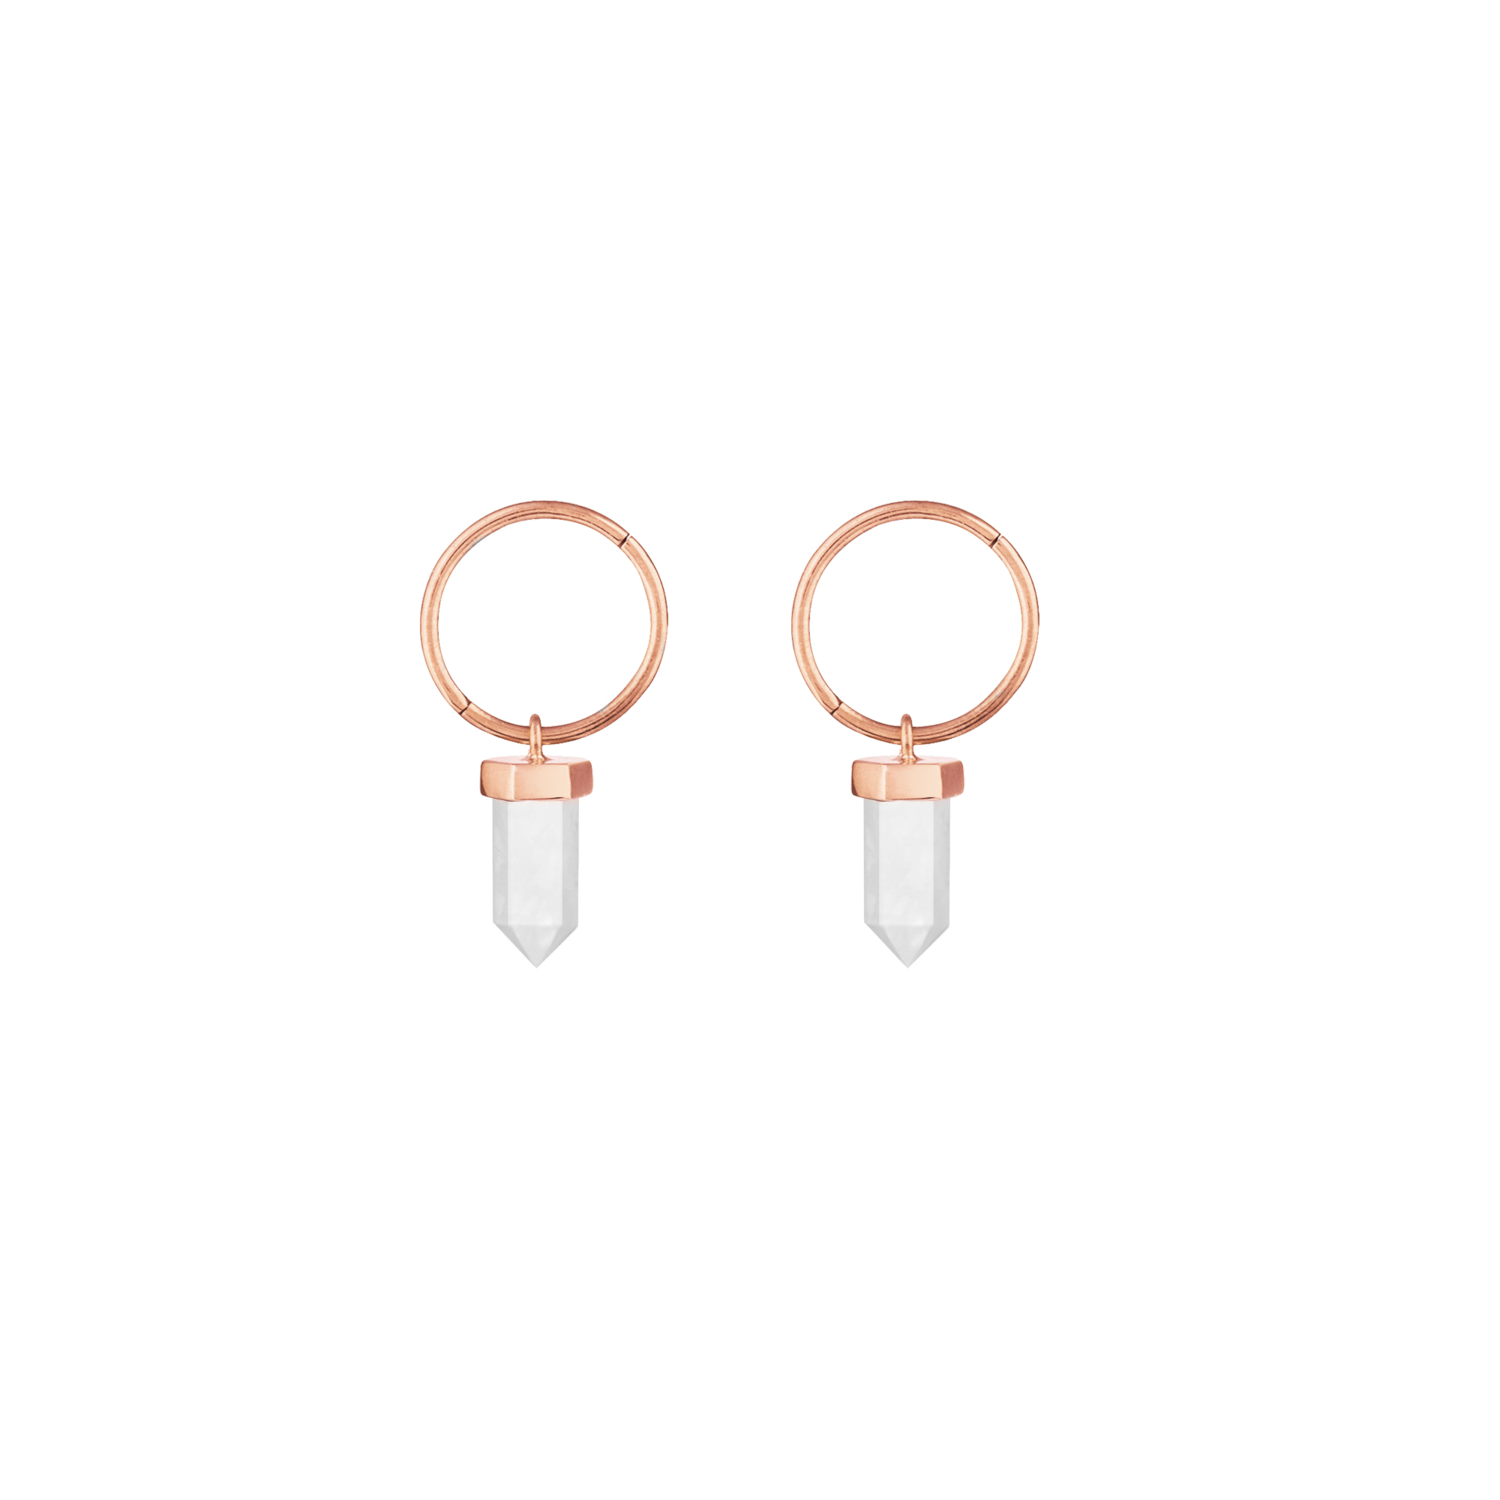 Fire Flies Sleepers #1.5 - Clear Quartz Crystal - 24K Rose Gold Plated